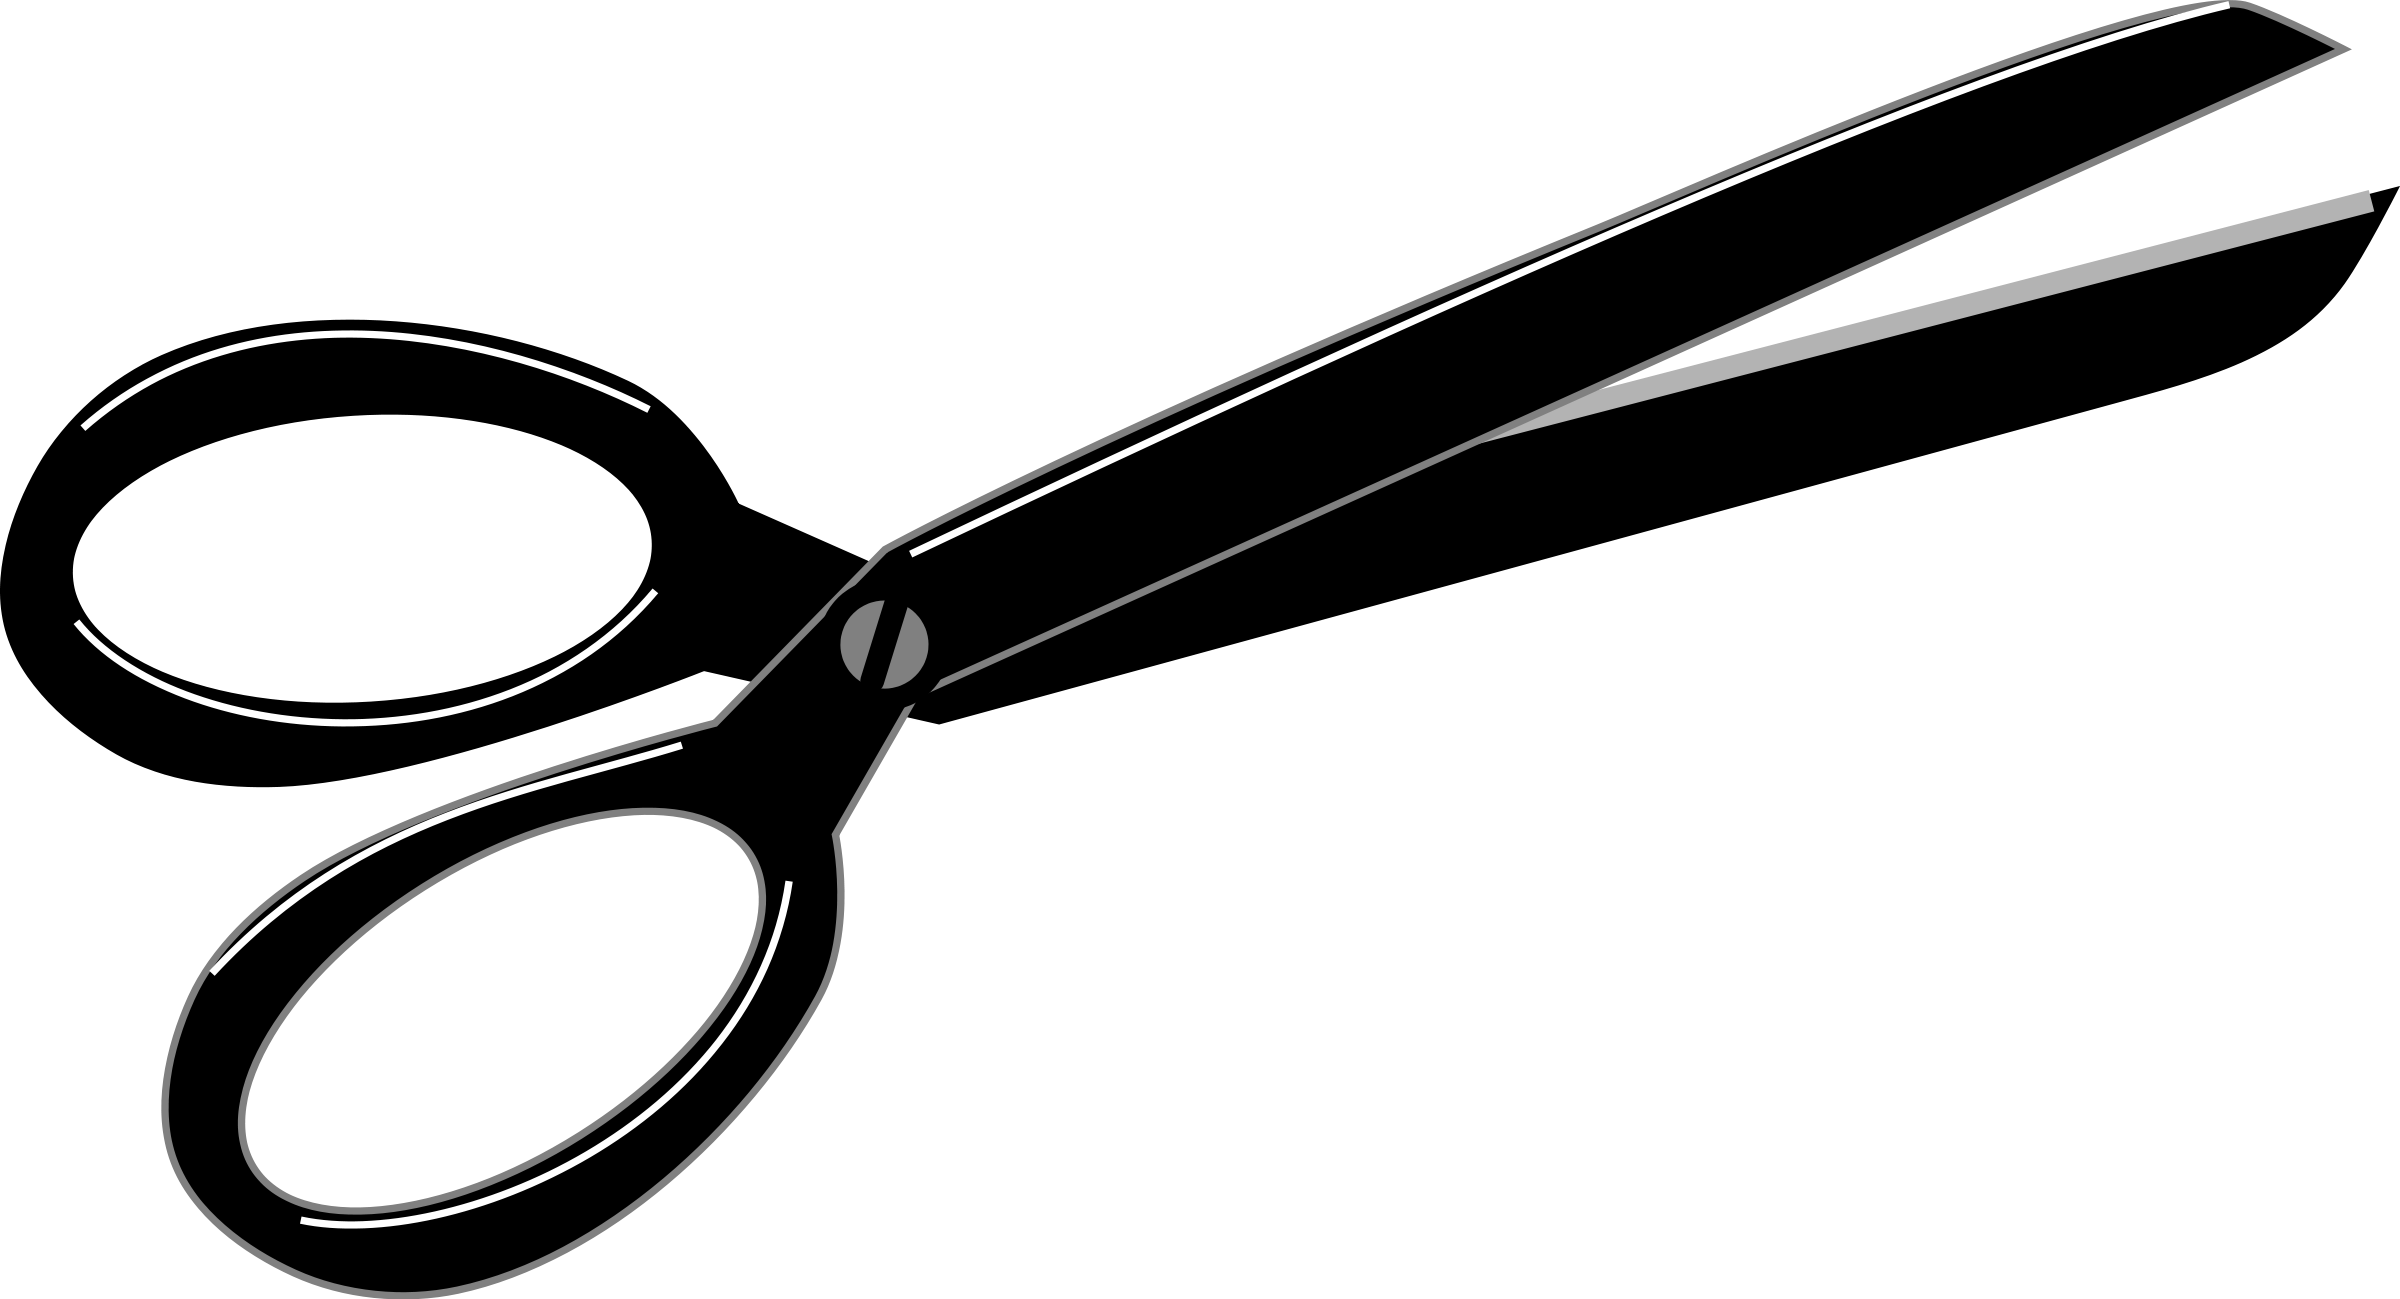 Scissors clipart black and white free images 6